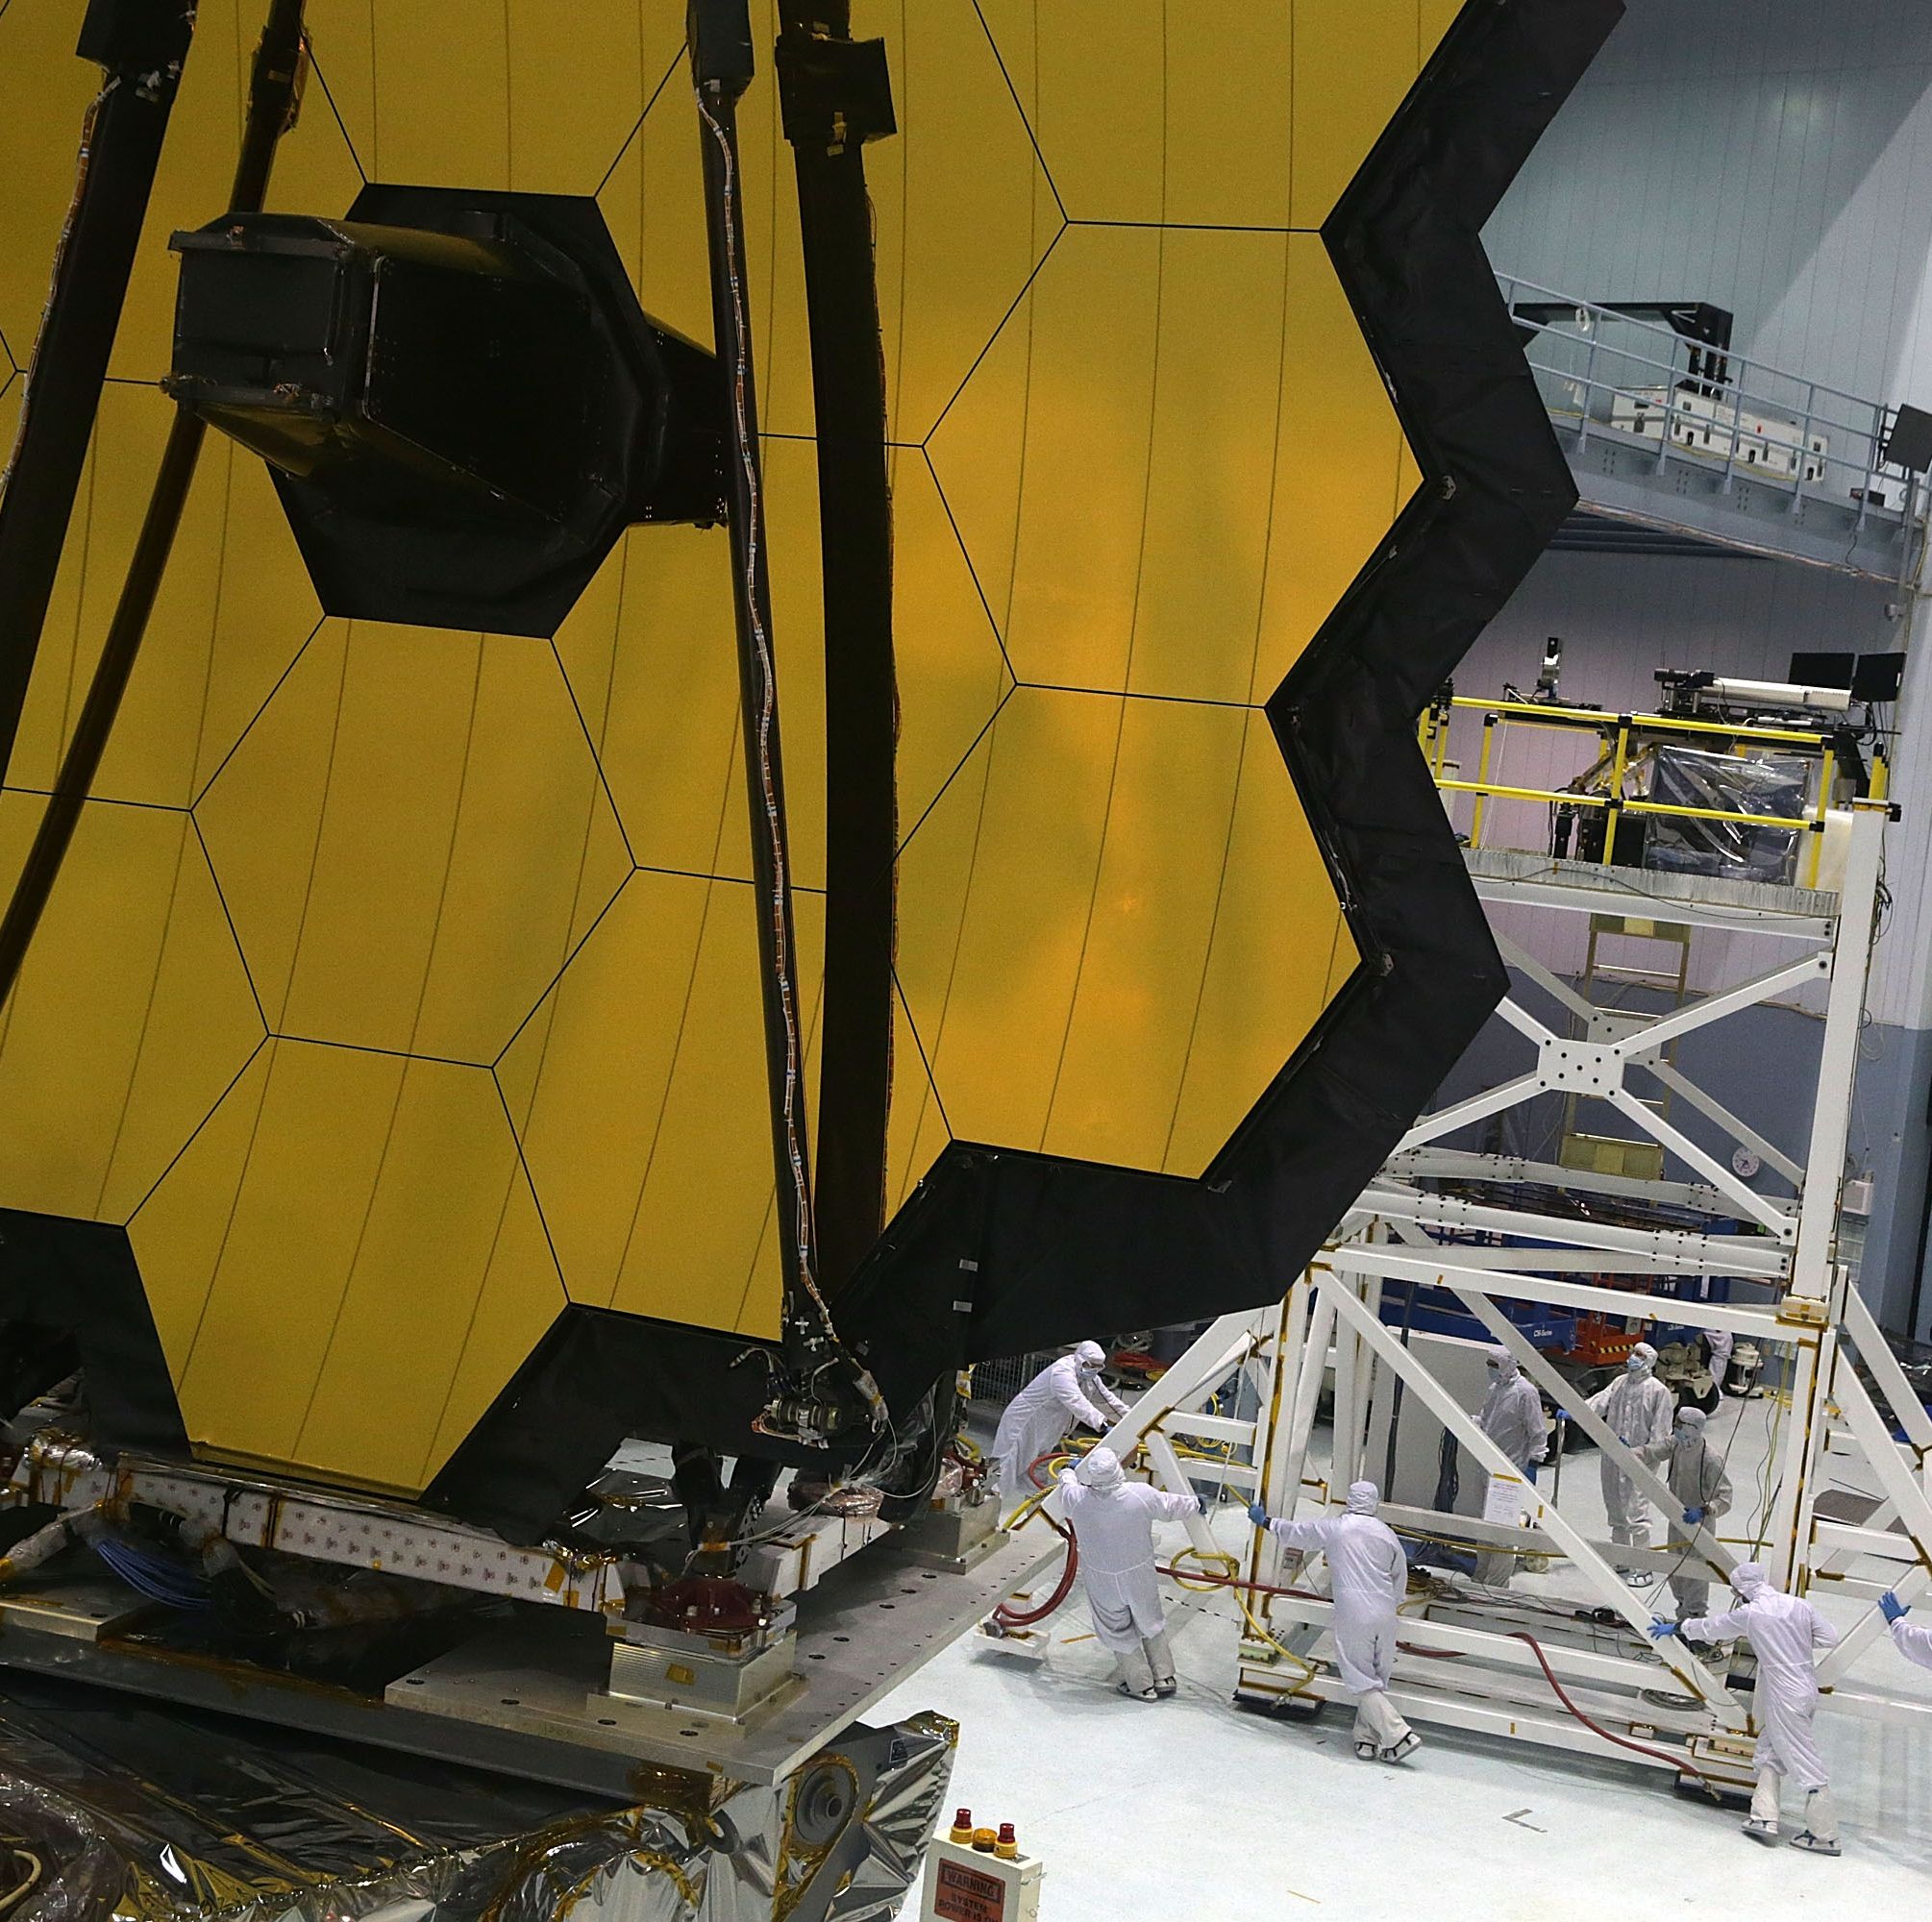 A Micrometeoroid Was No Match For the Resilient James Webb Space Telescope